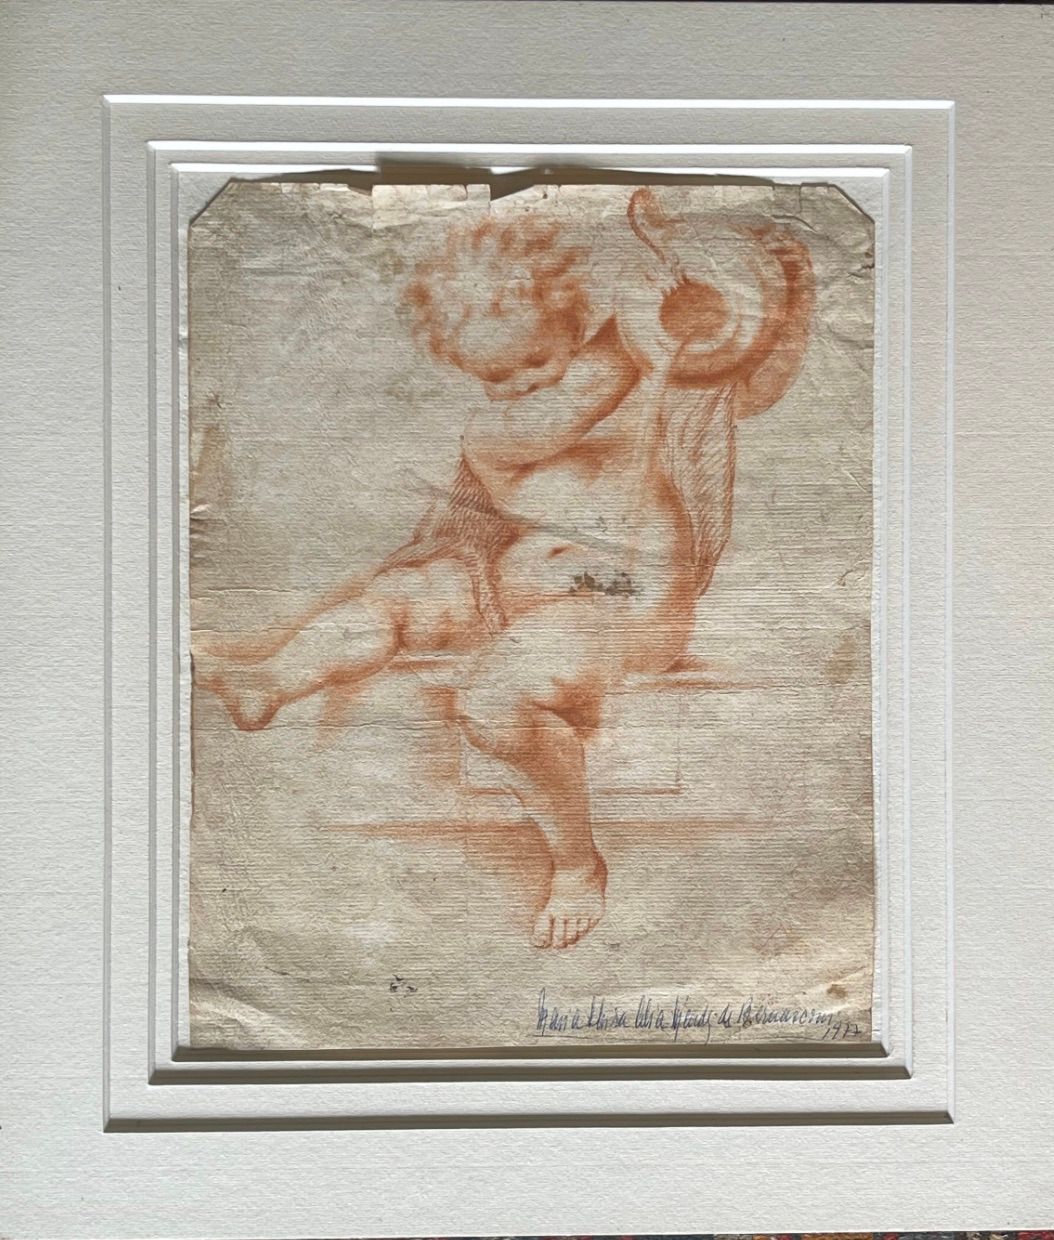 Italian School, 17th century, A Putto Holding a Vase, Red Chalk on Paper Italien&hellip;